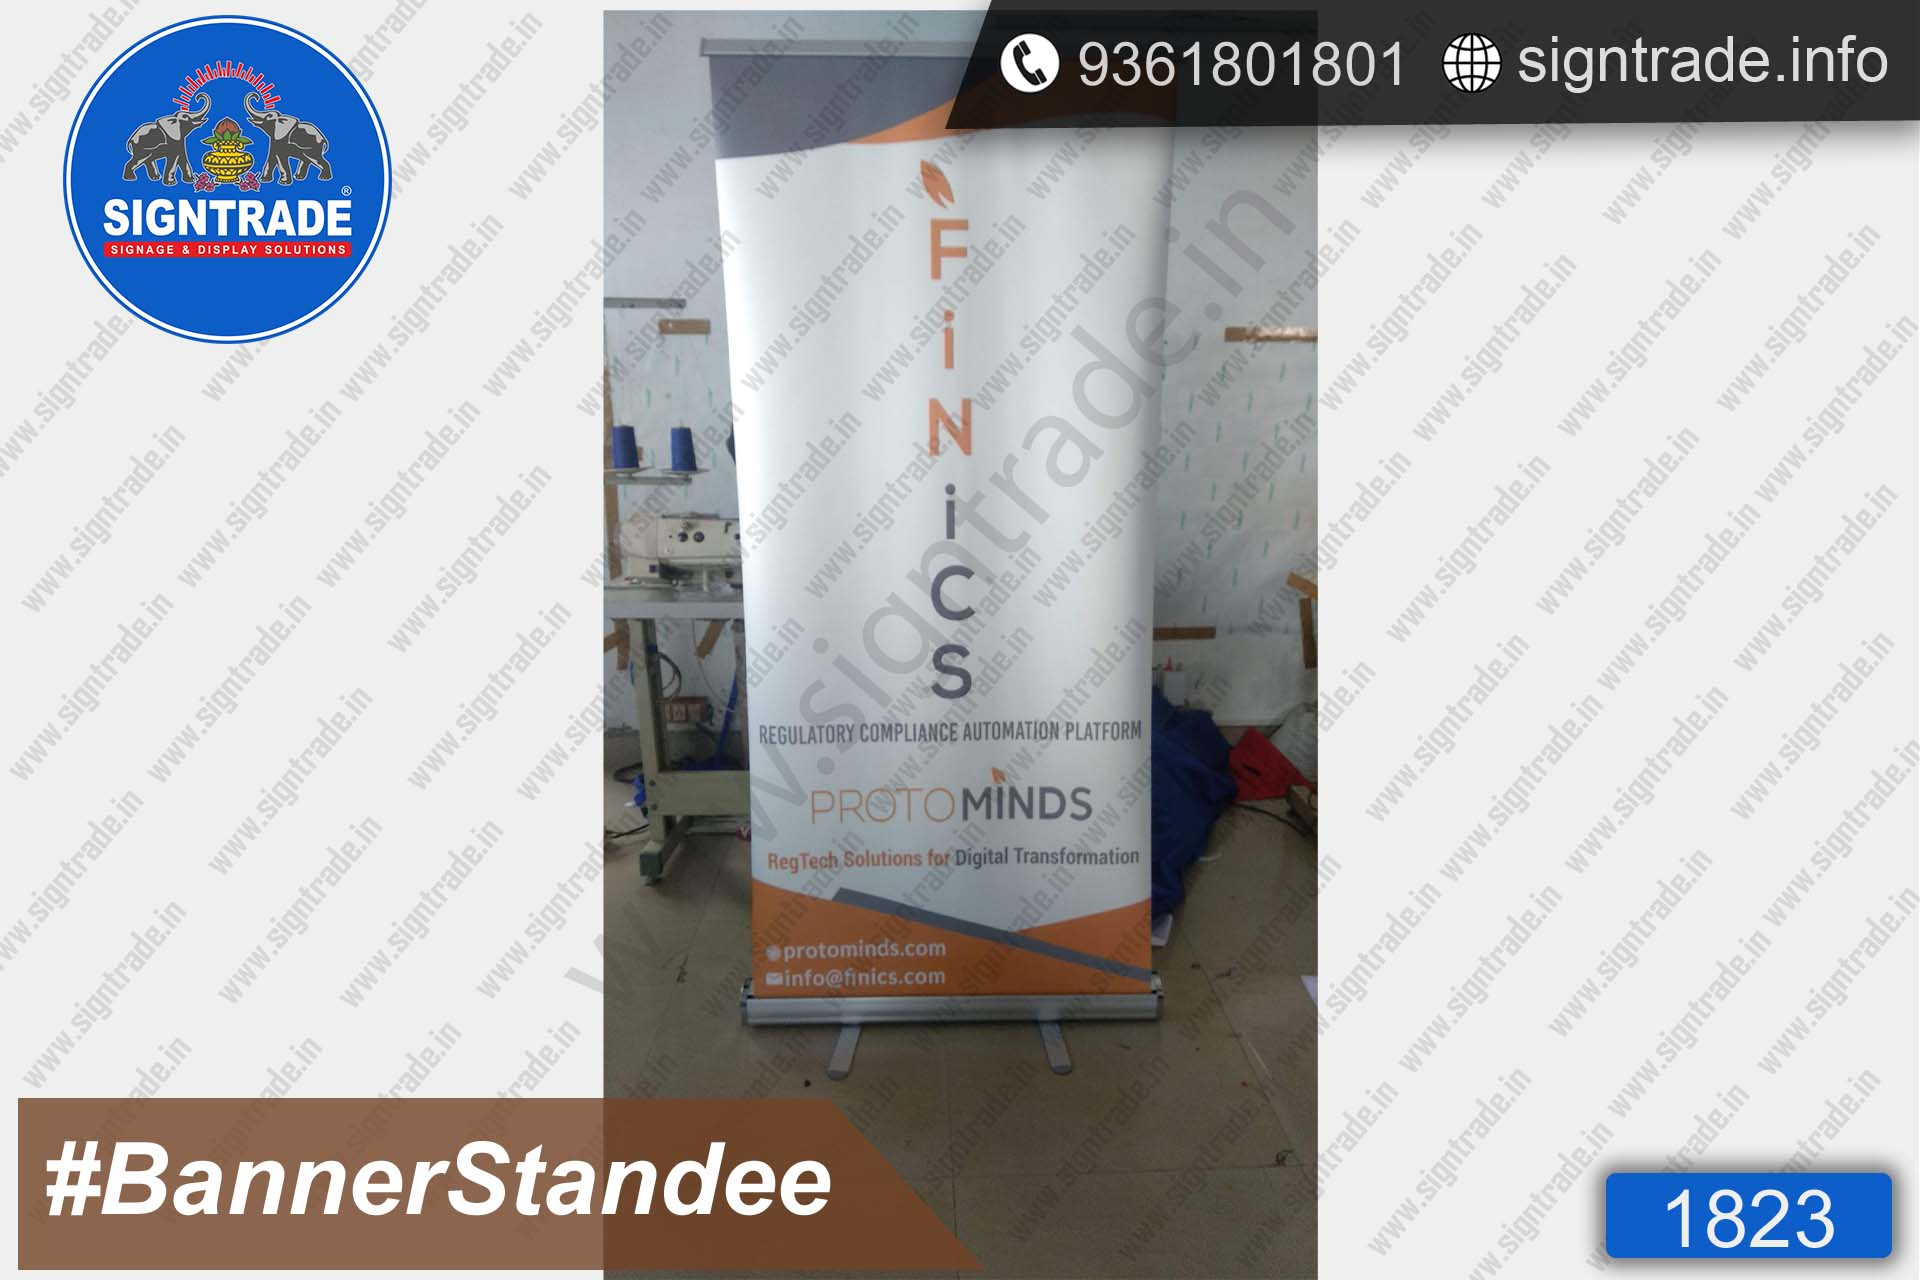 Protominds banner standee